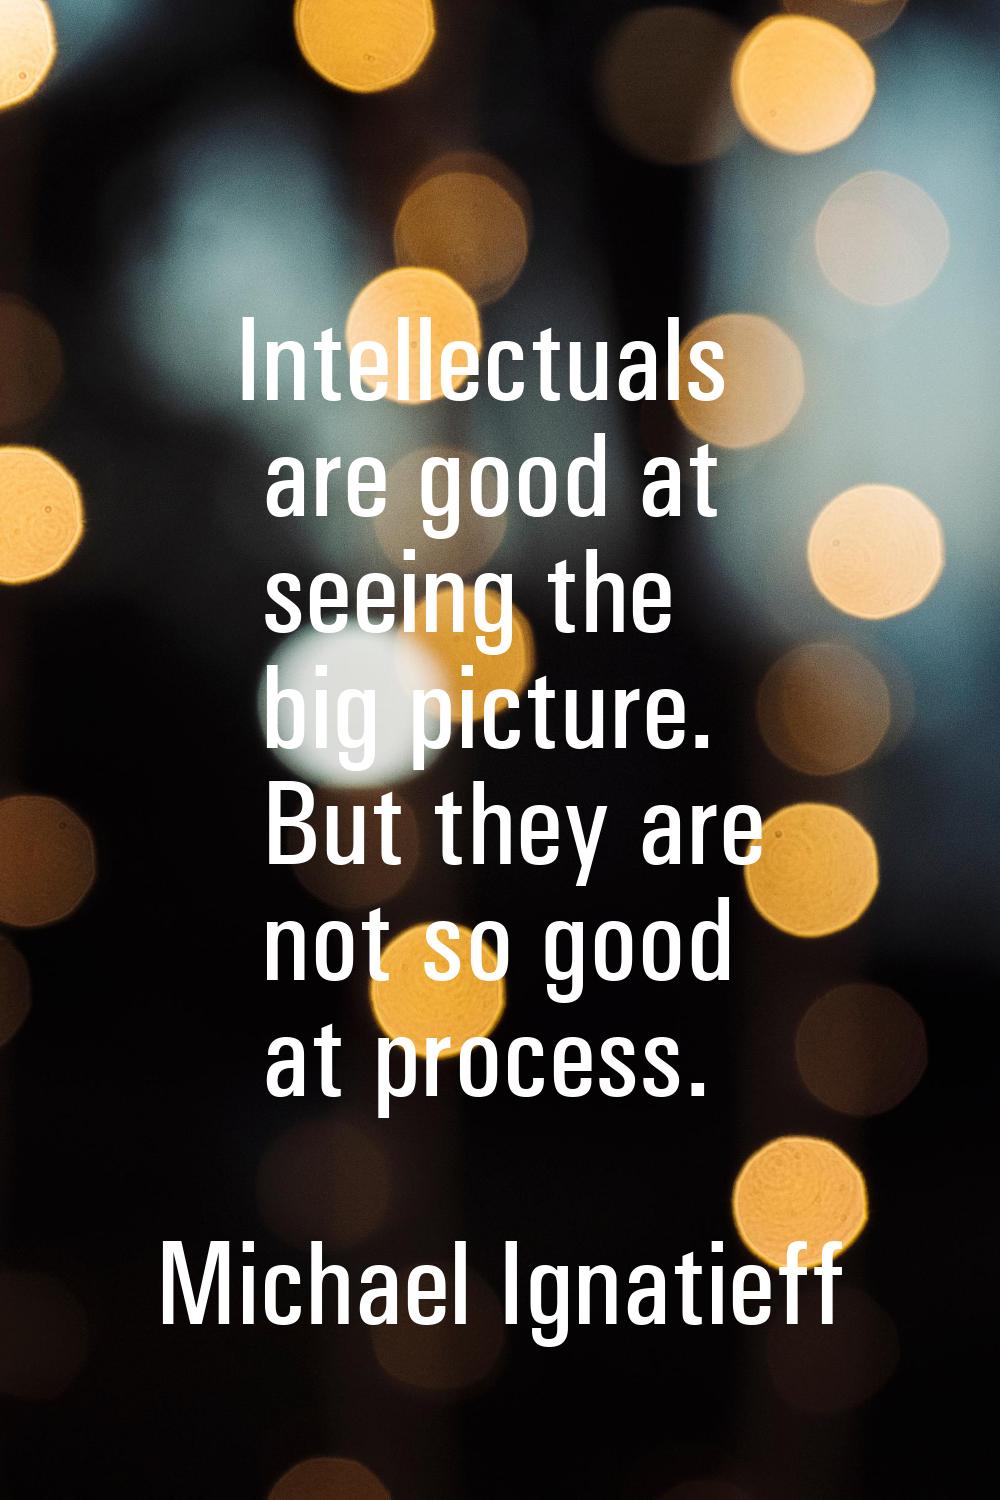 Intellectuals are good at seeing the big picture. But they are not so good at process.